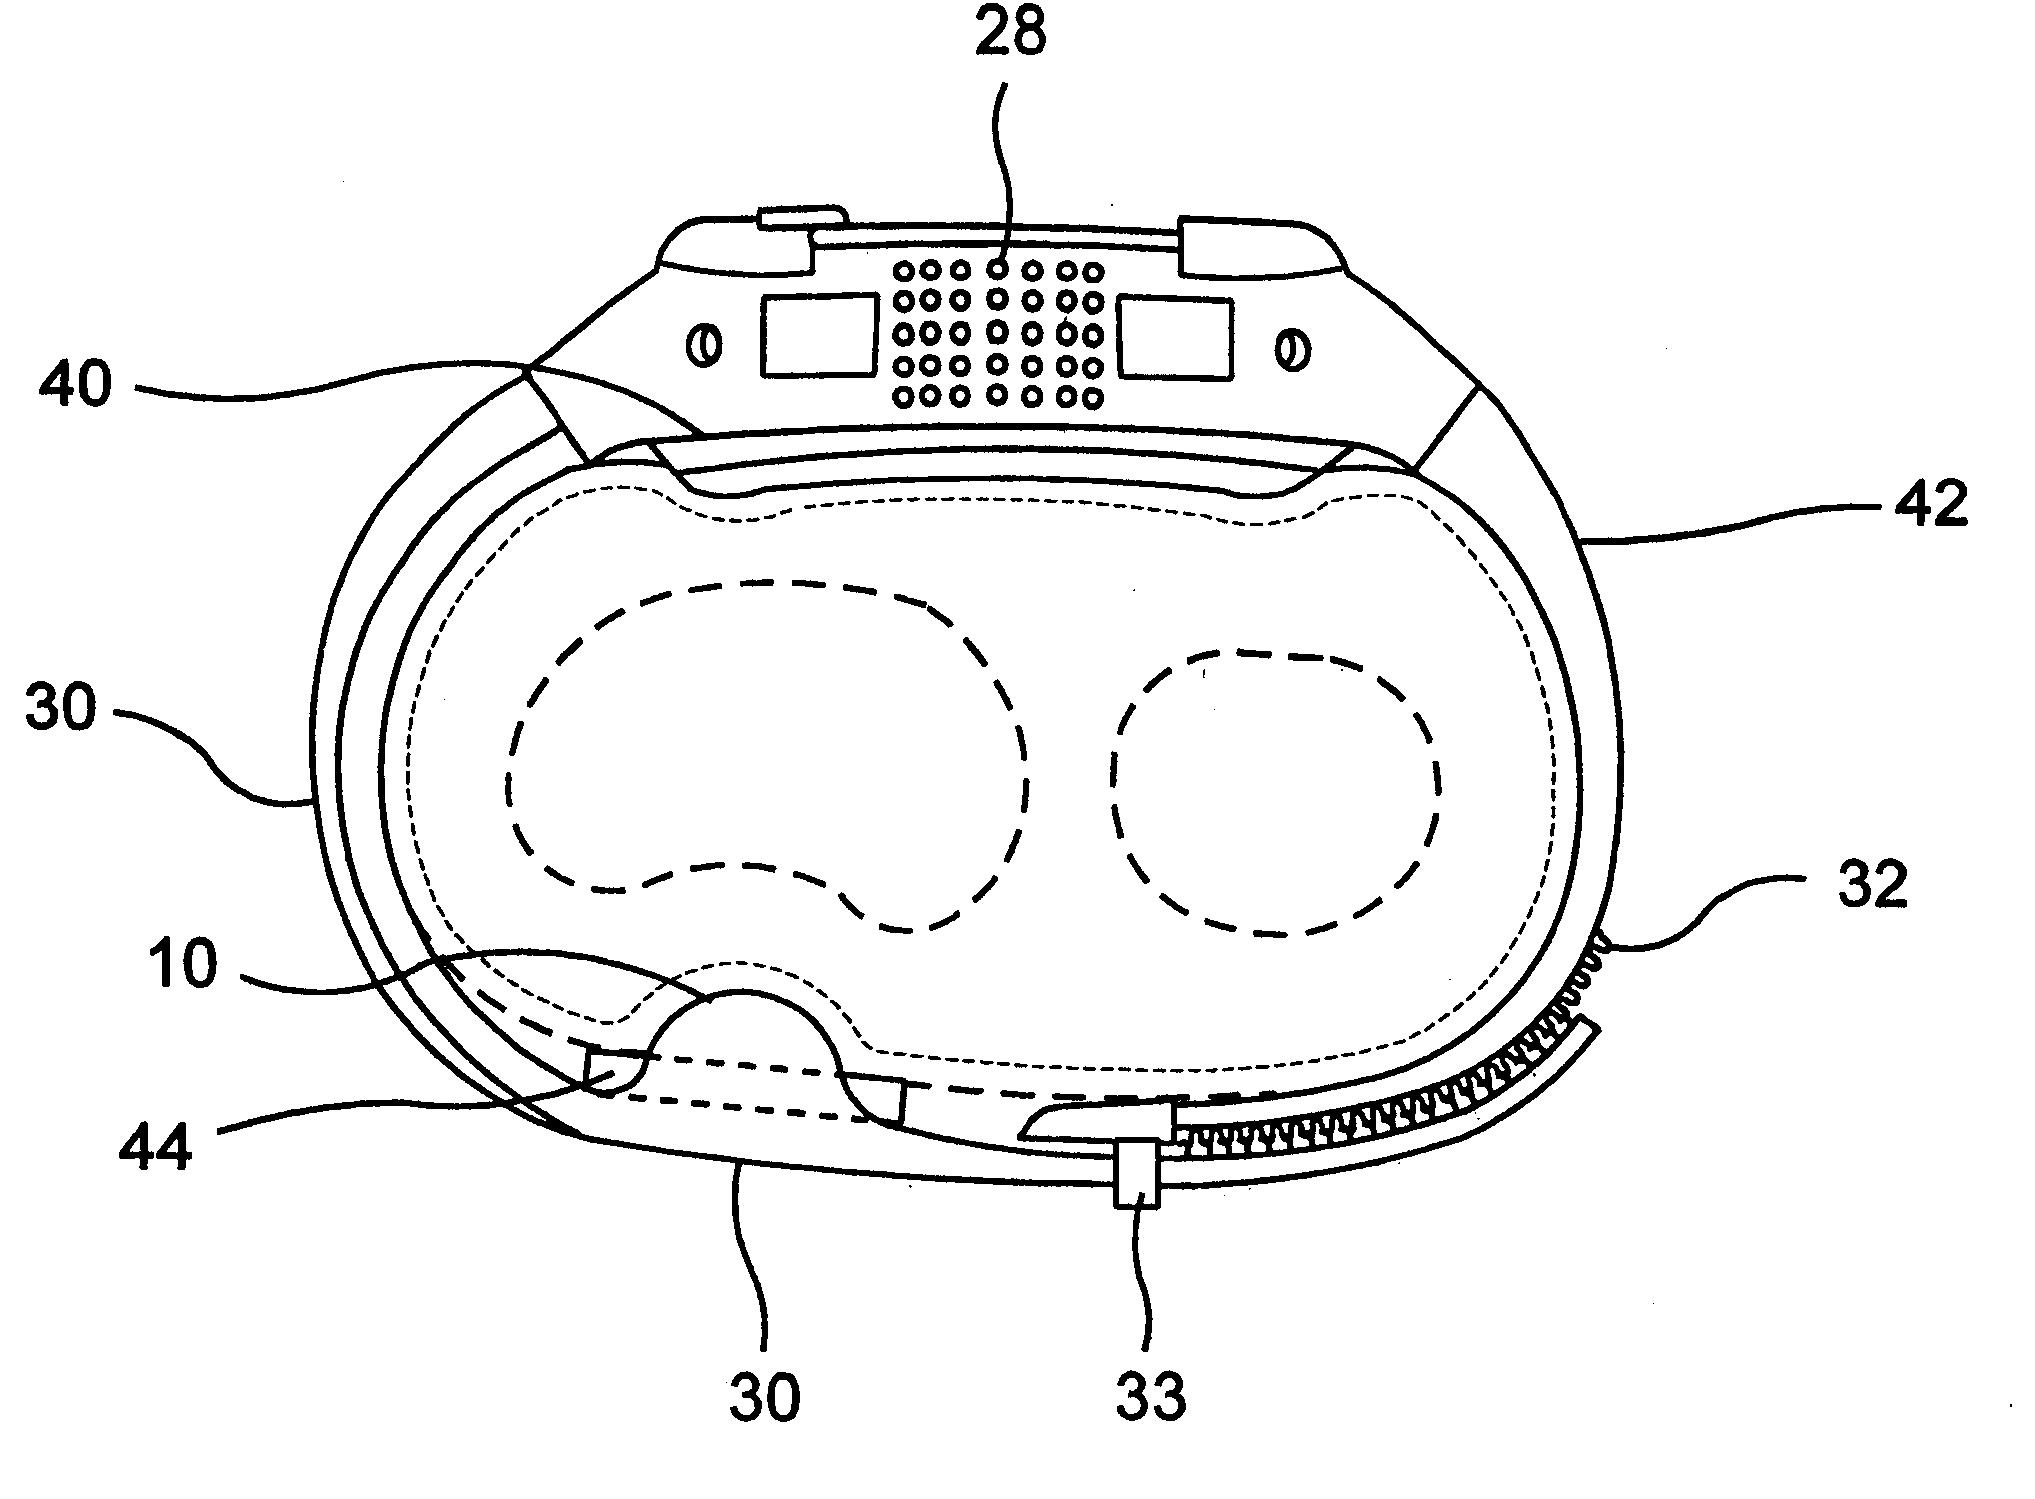 Method and device for monitoring blood pressure